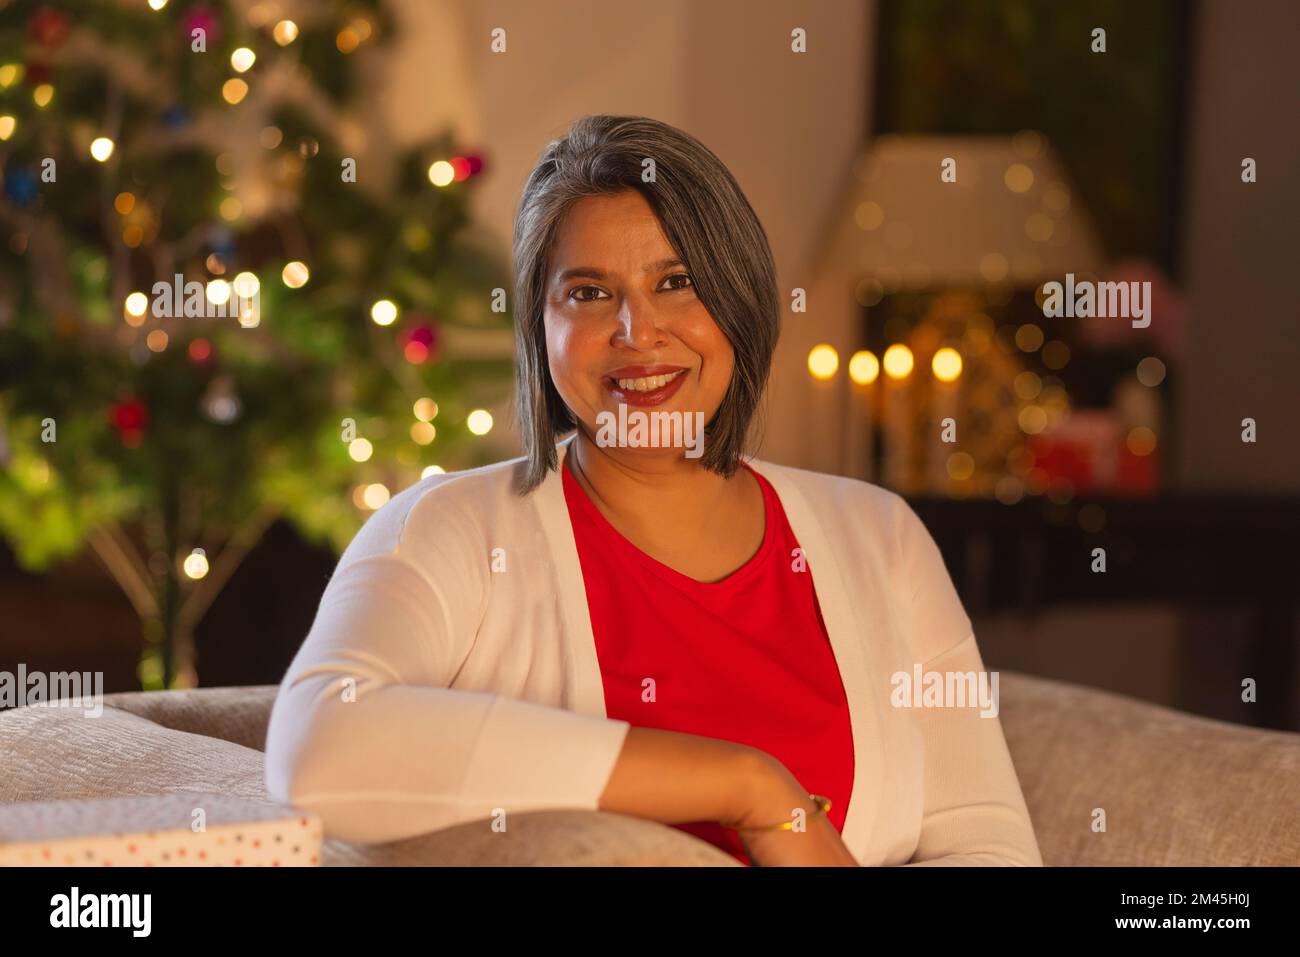 Portrait of a cheerful senior woman looking at camera Stock Photo